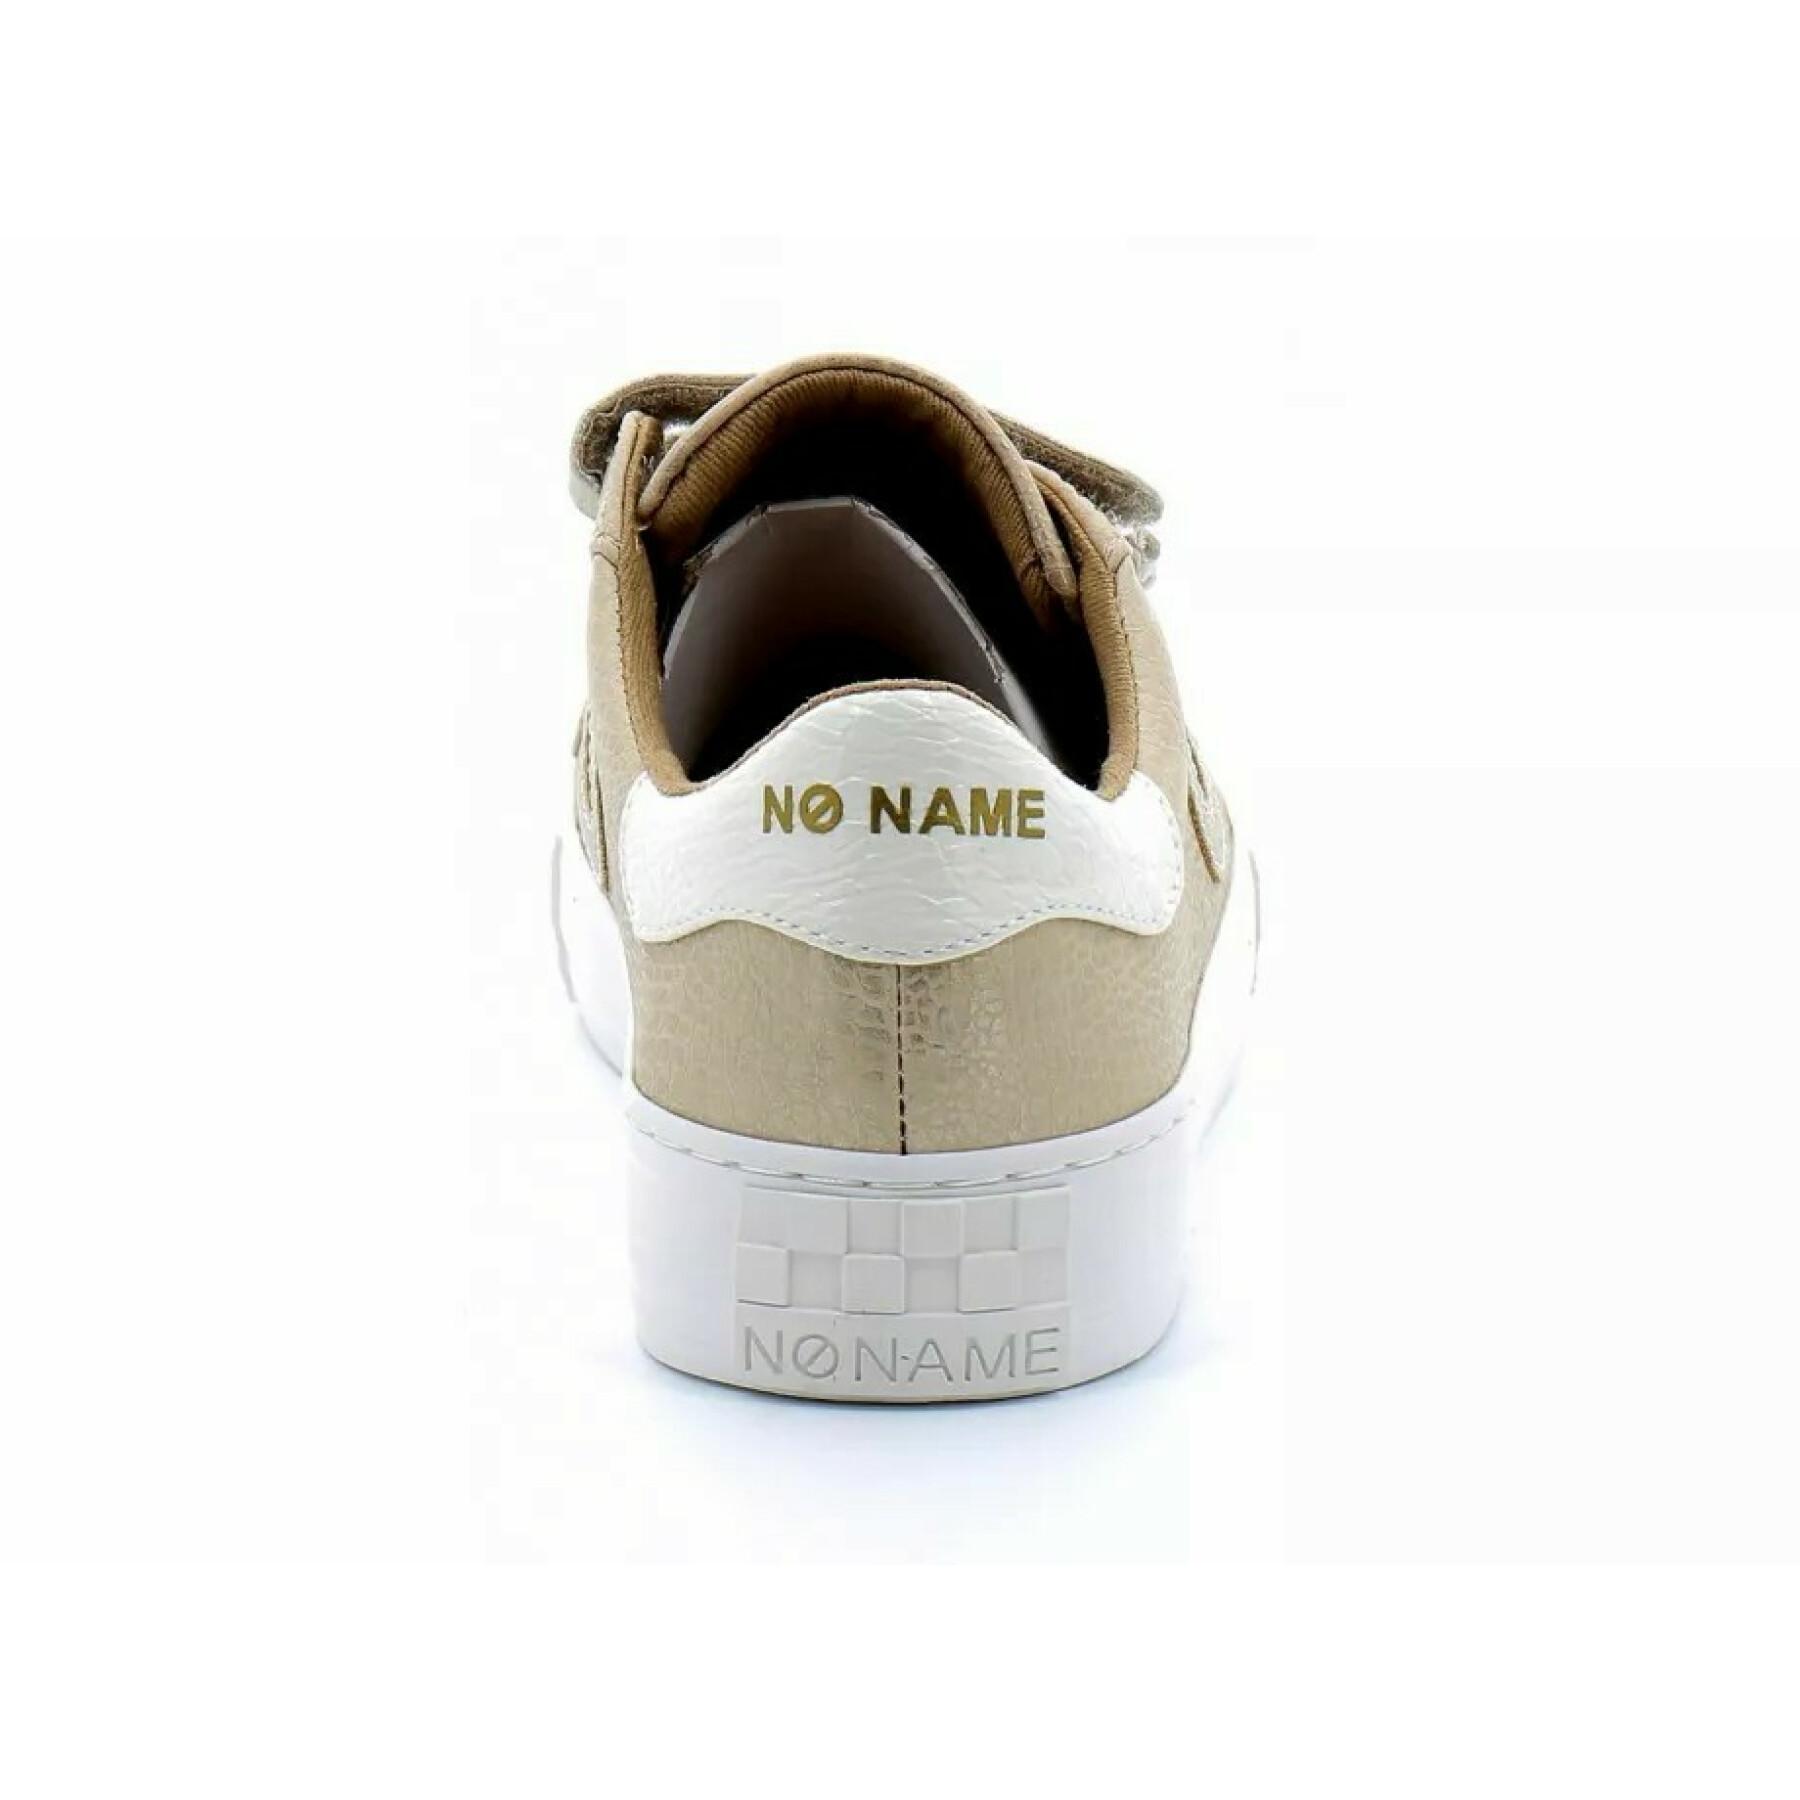 Sneakers No Name Arcade straps side master/foogy